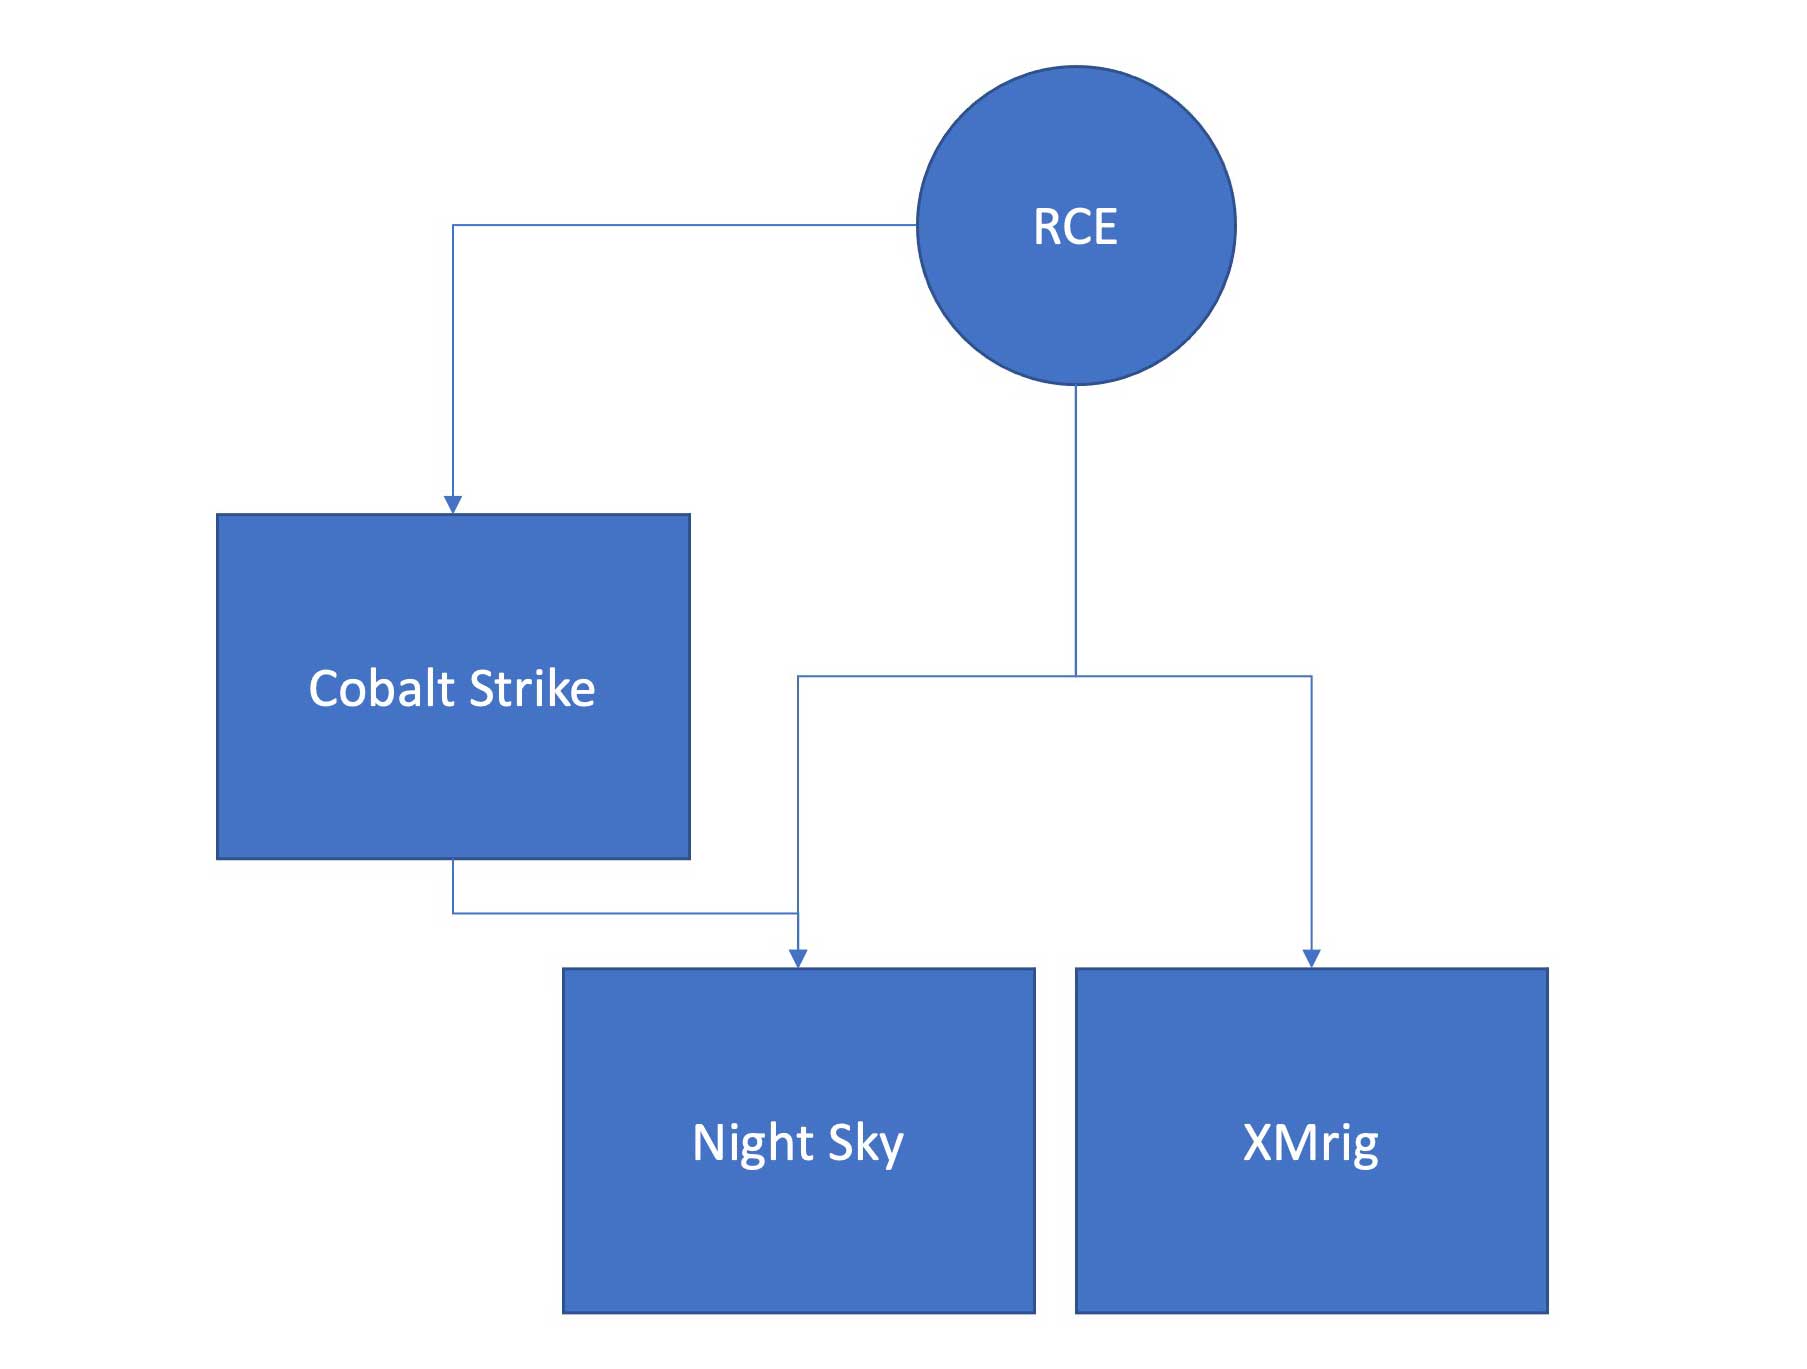 RCE pointing to Cobalt Strike with Night Sky and XMrig beneath that